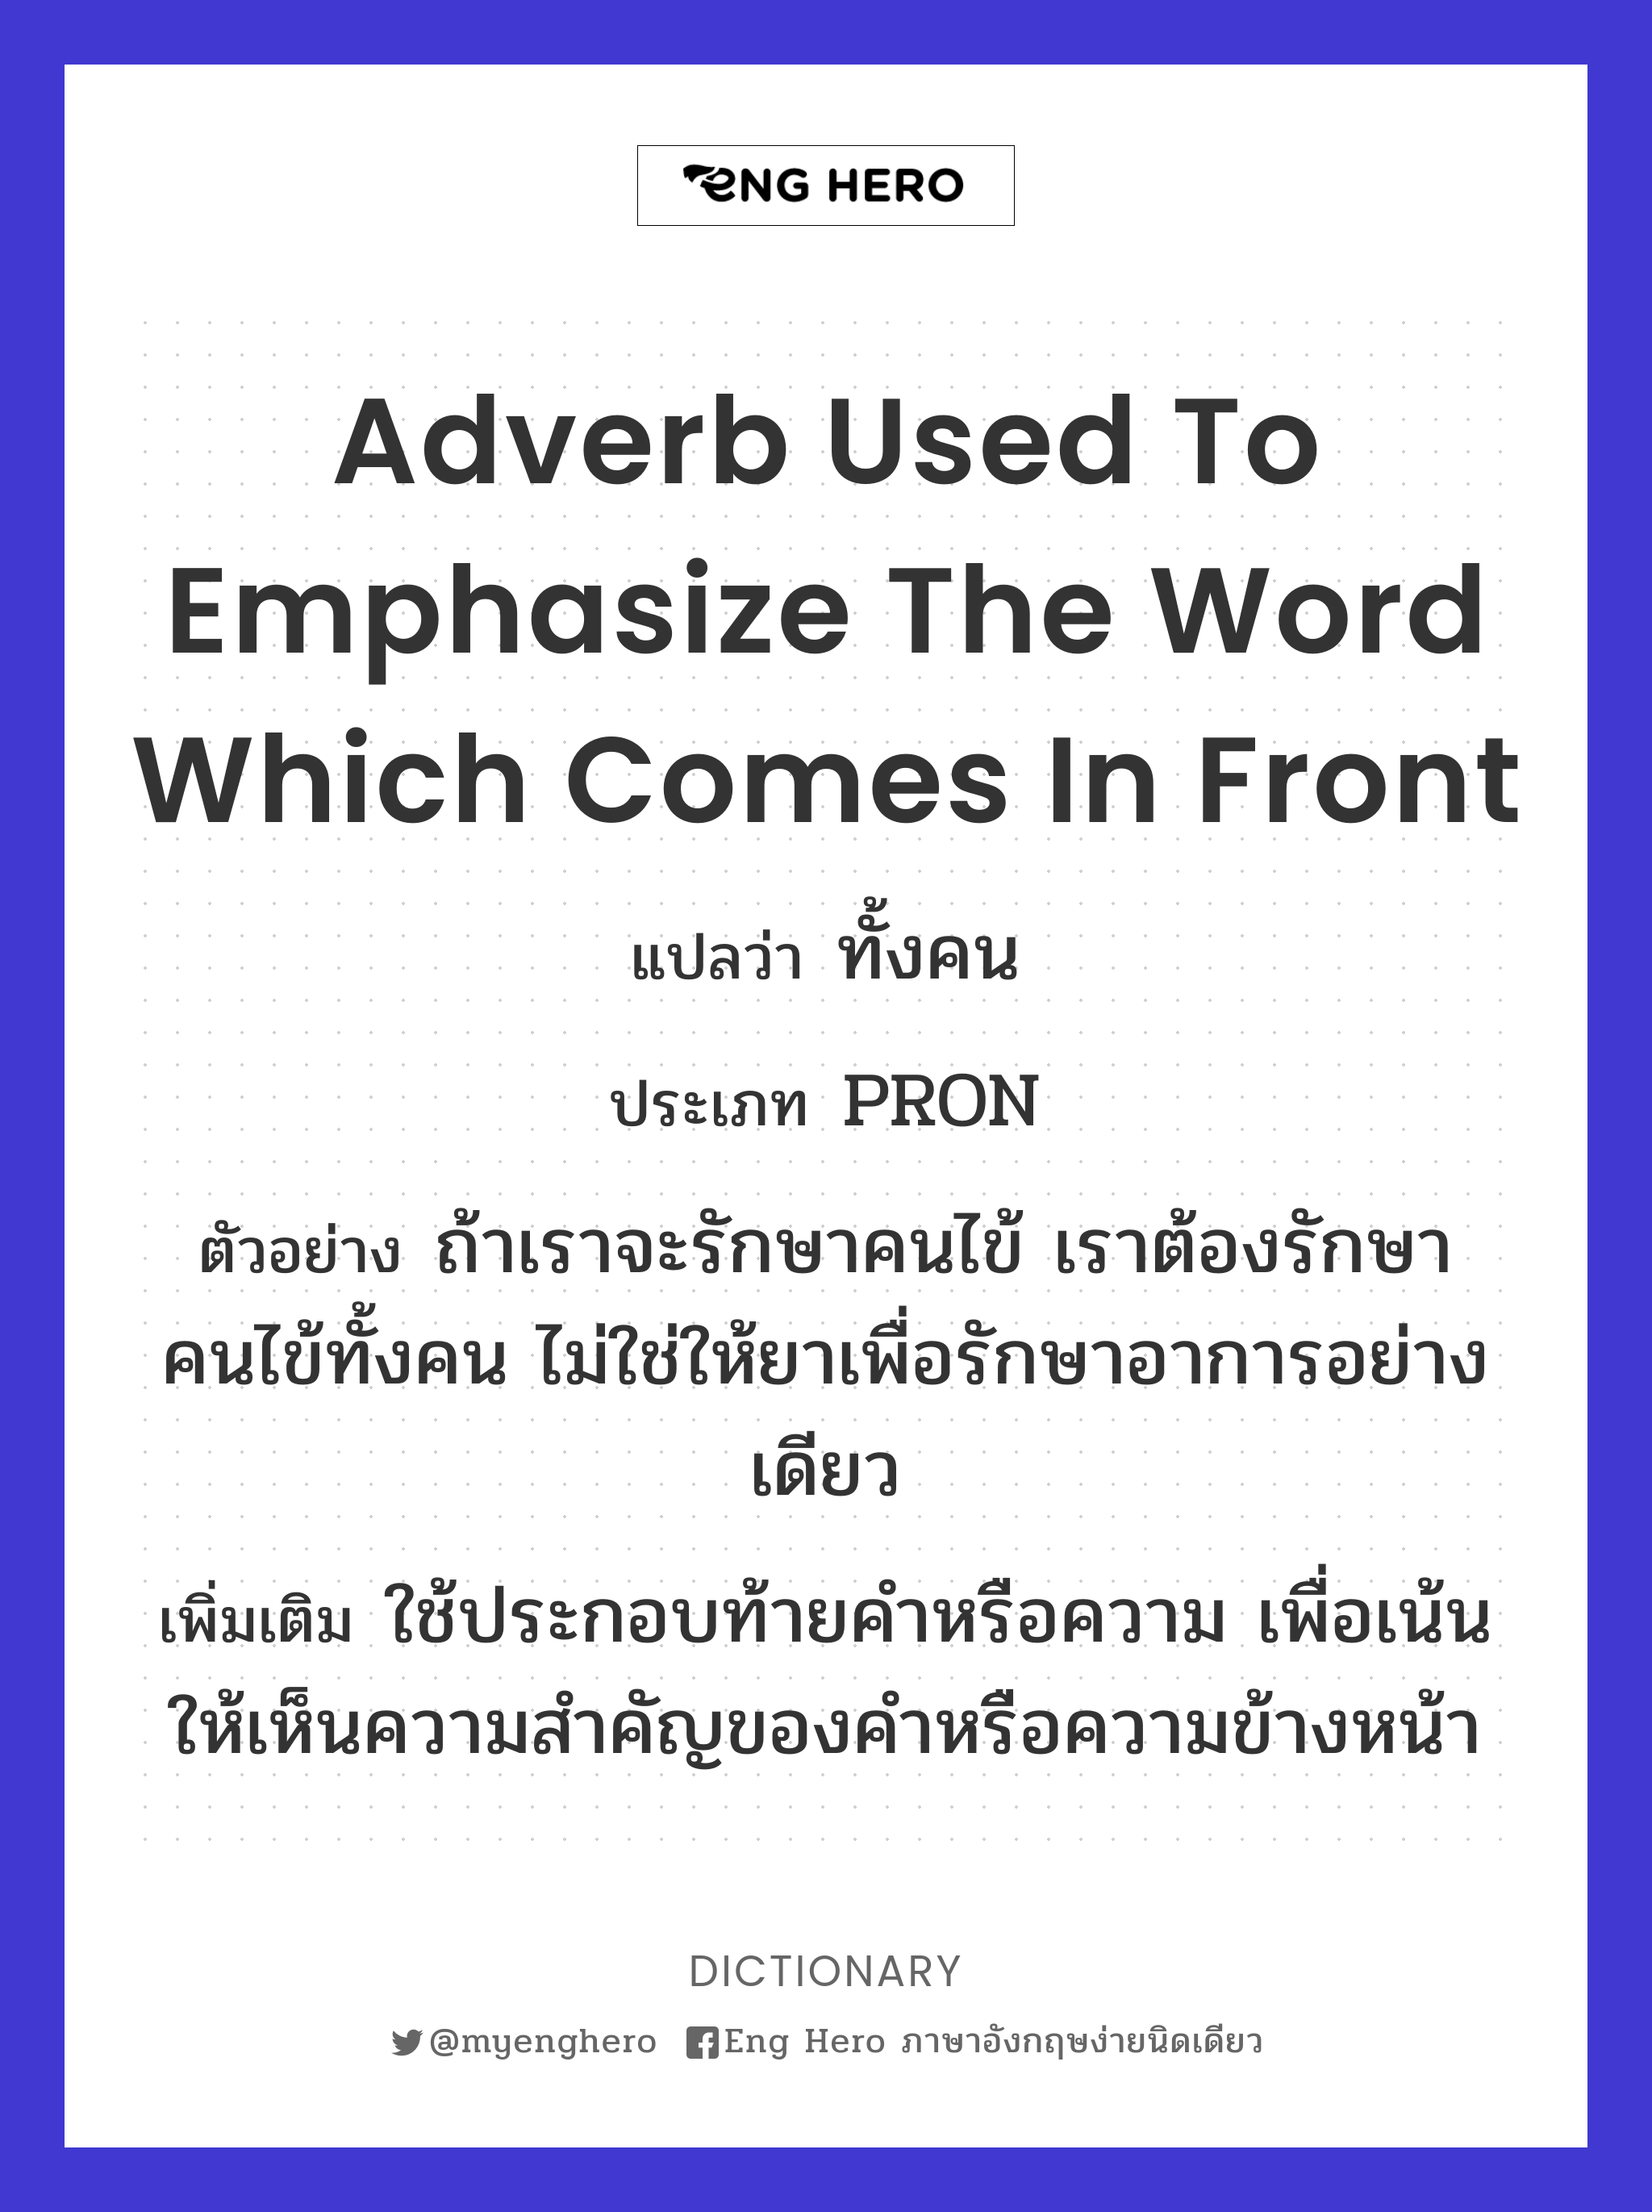 adverb used to emphasize the word which comes in front